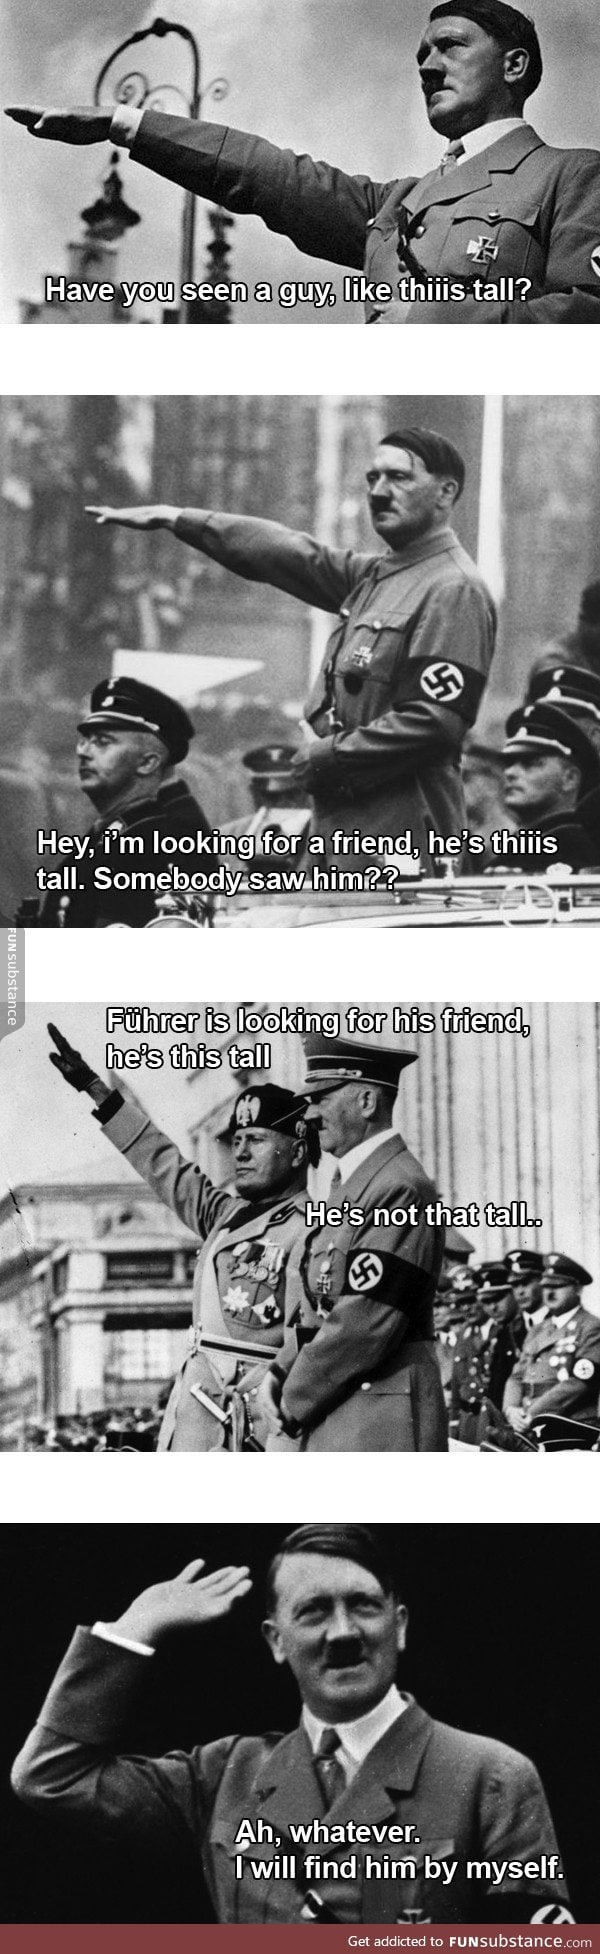 Führer is looking for his friend